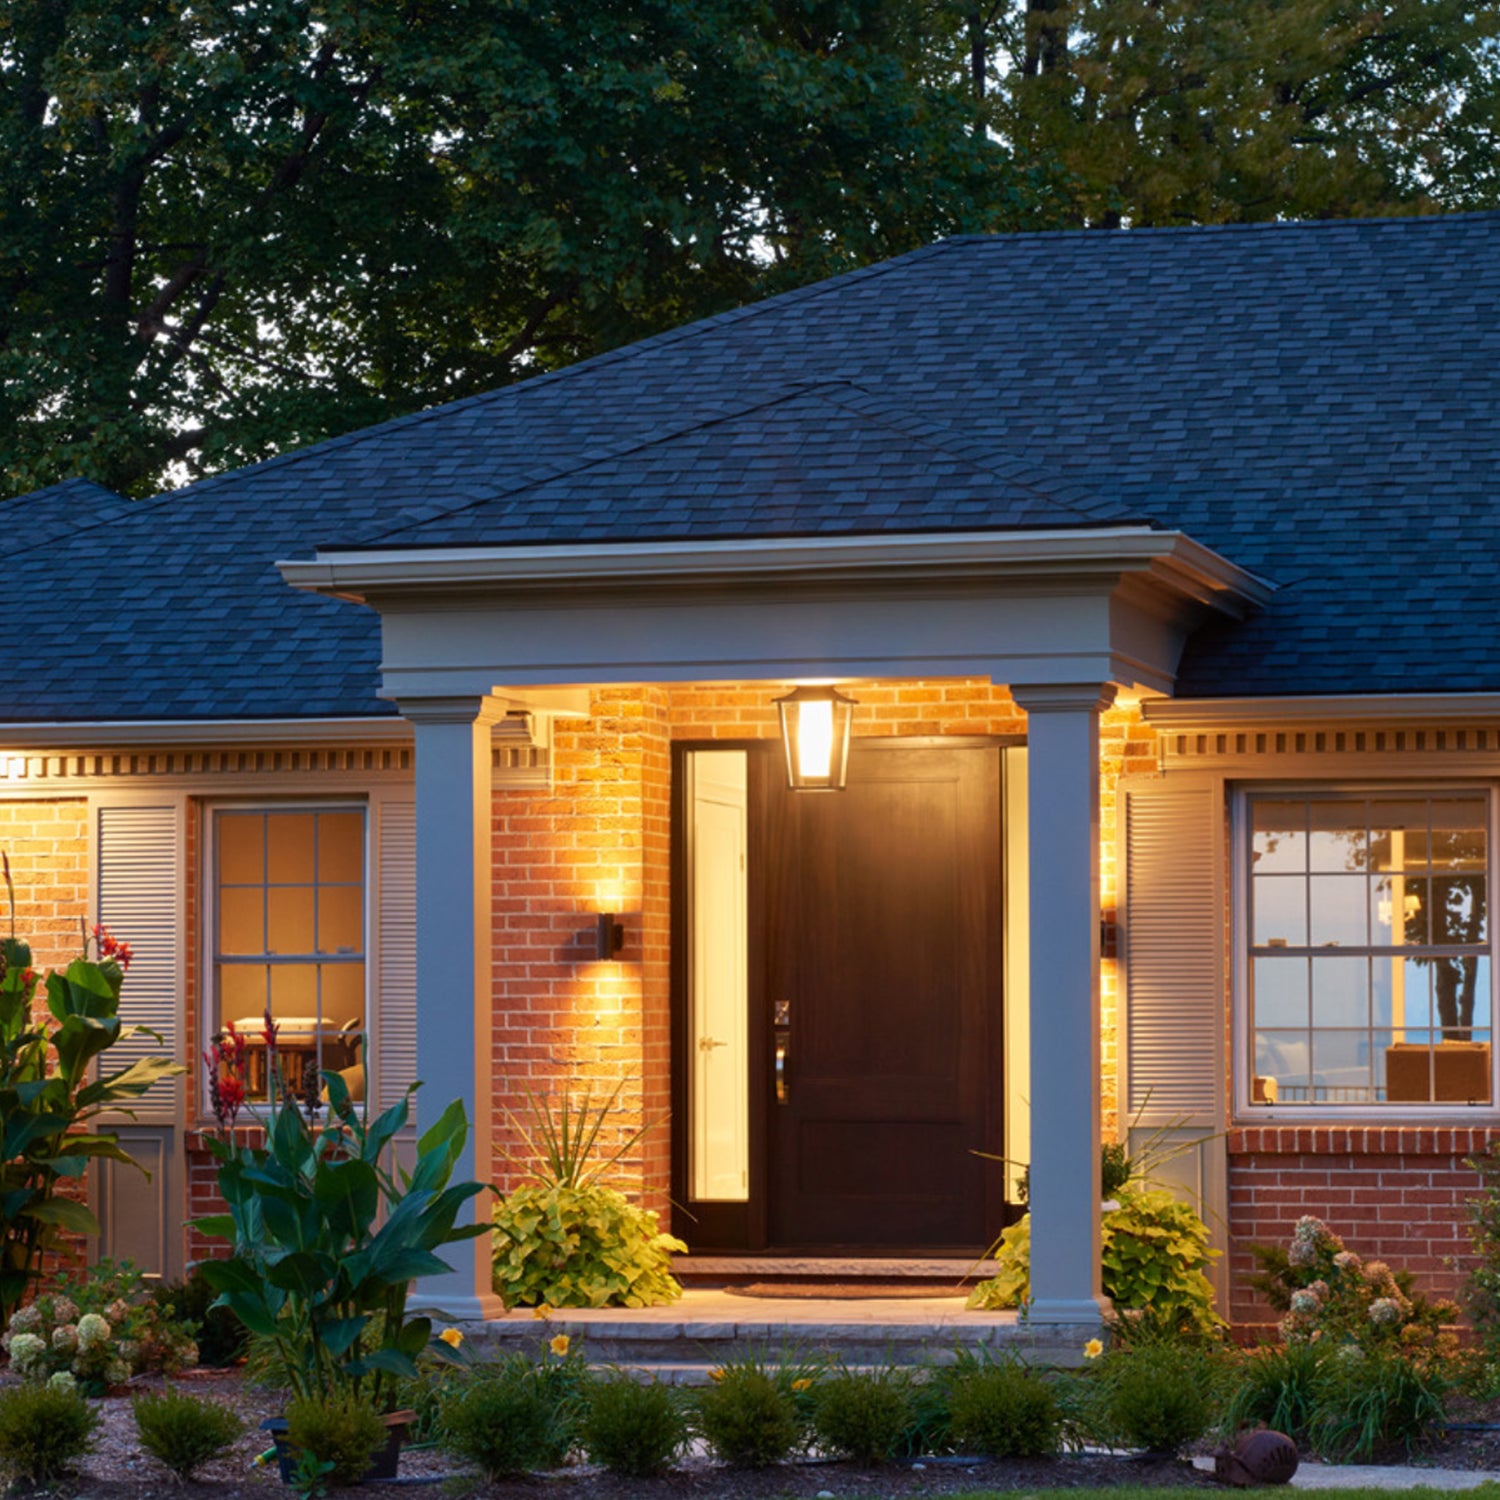 Brick house with a well-lit front entrance featuring a black door, columns, and brass wall sconces on either side of the door.